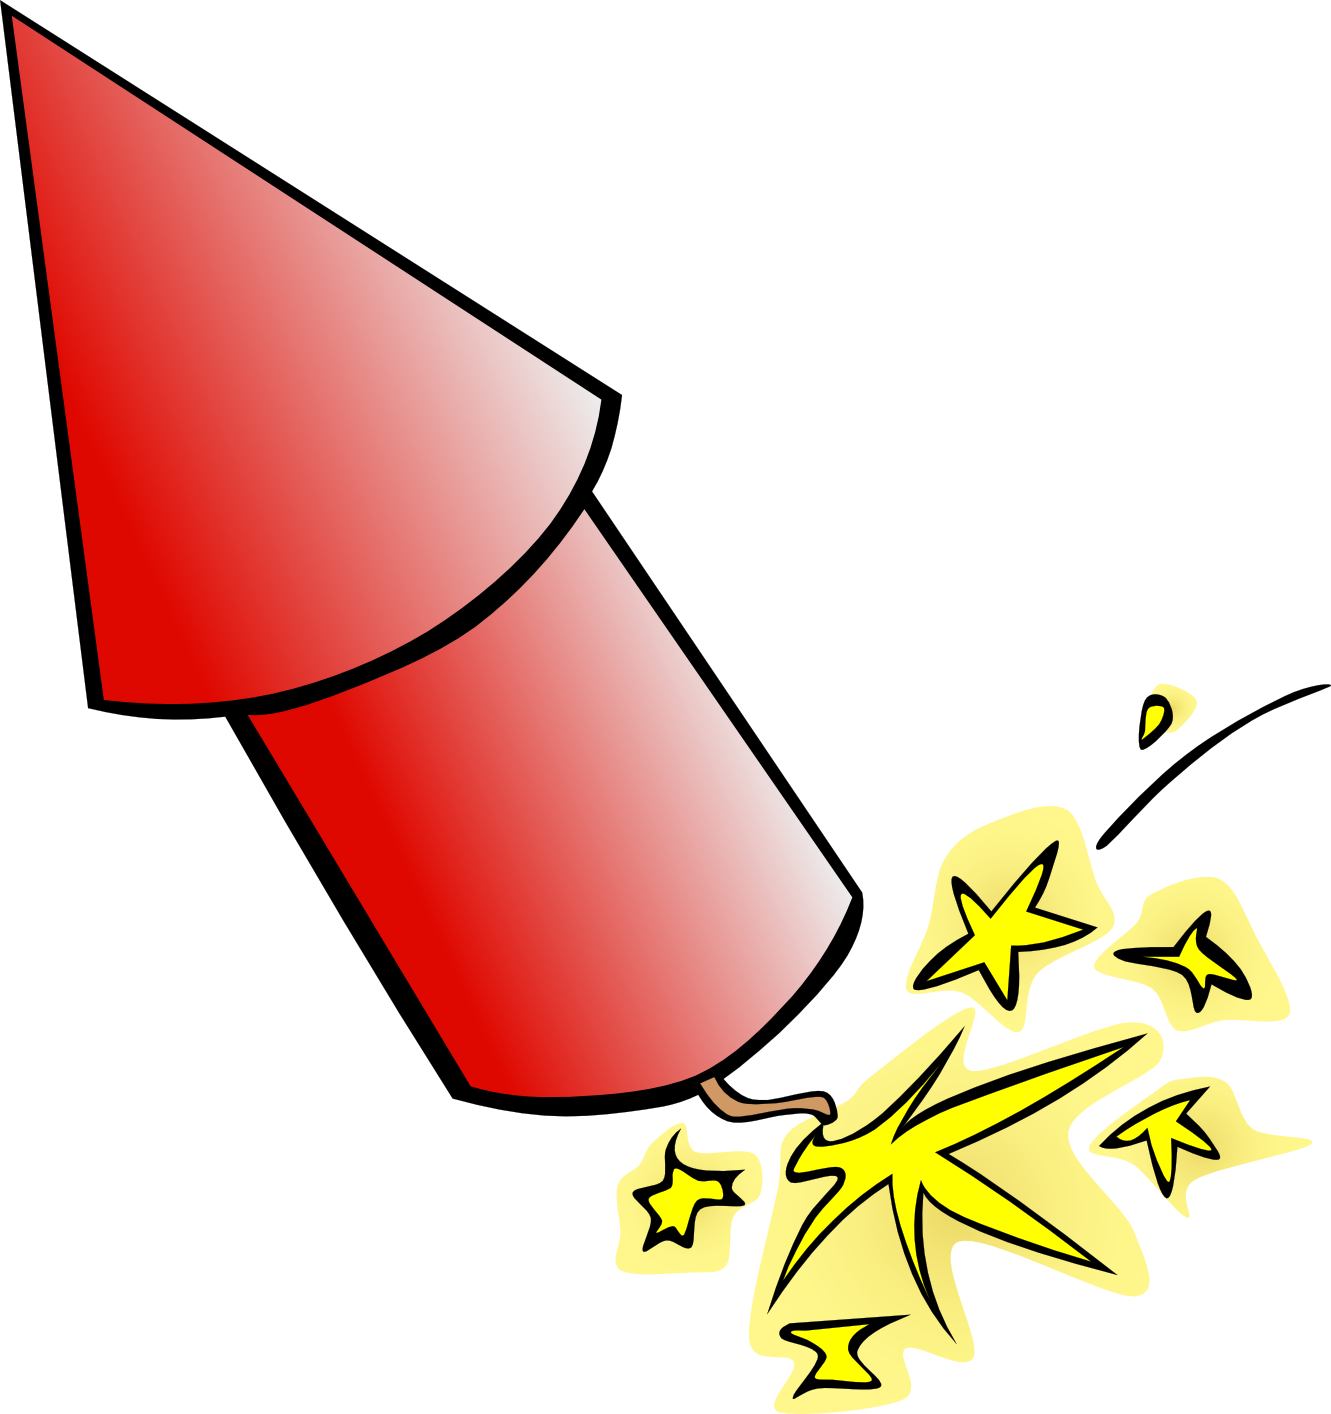 Clip Art: Rocket Fireworks openclipart.org commons. - Clipart library 